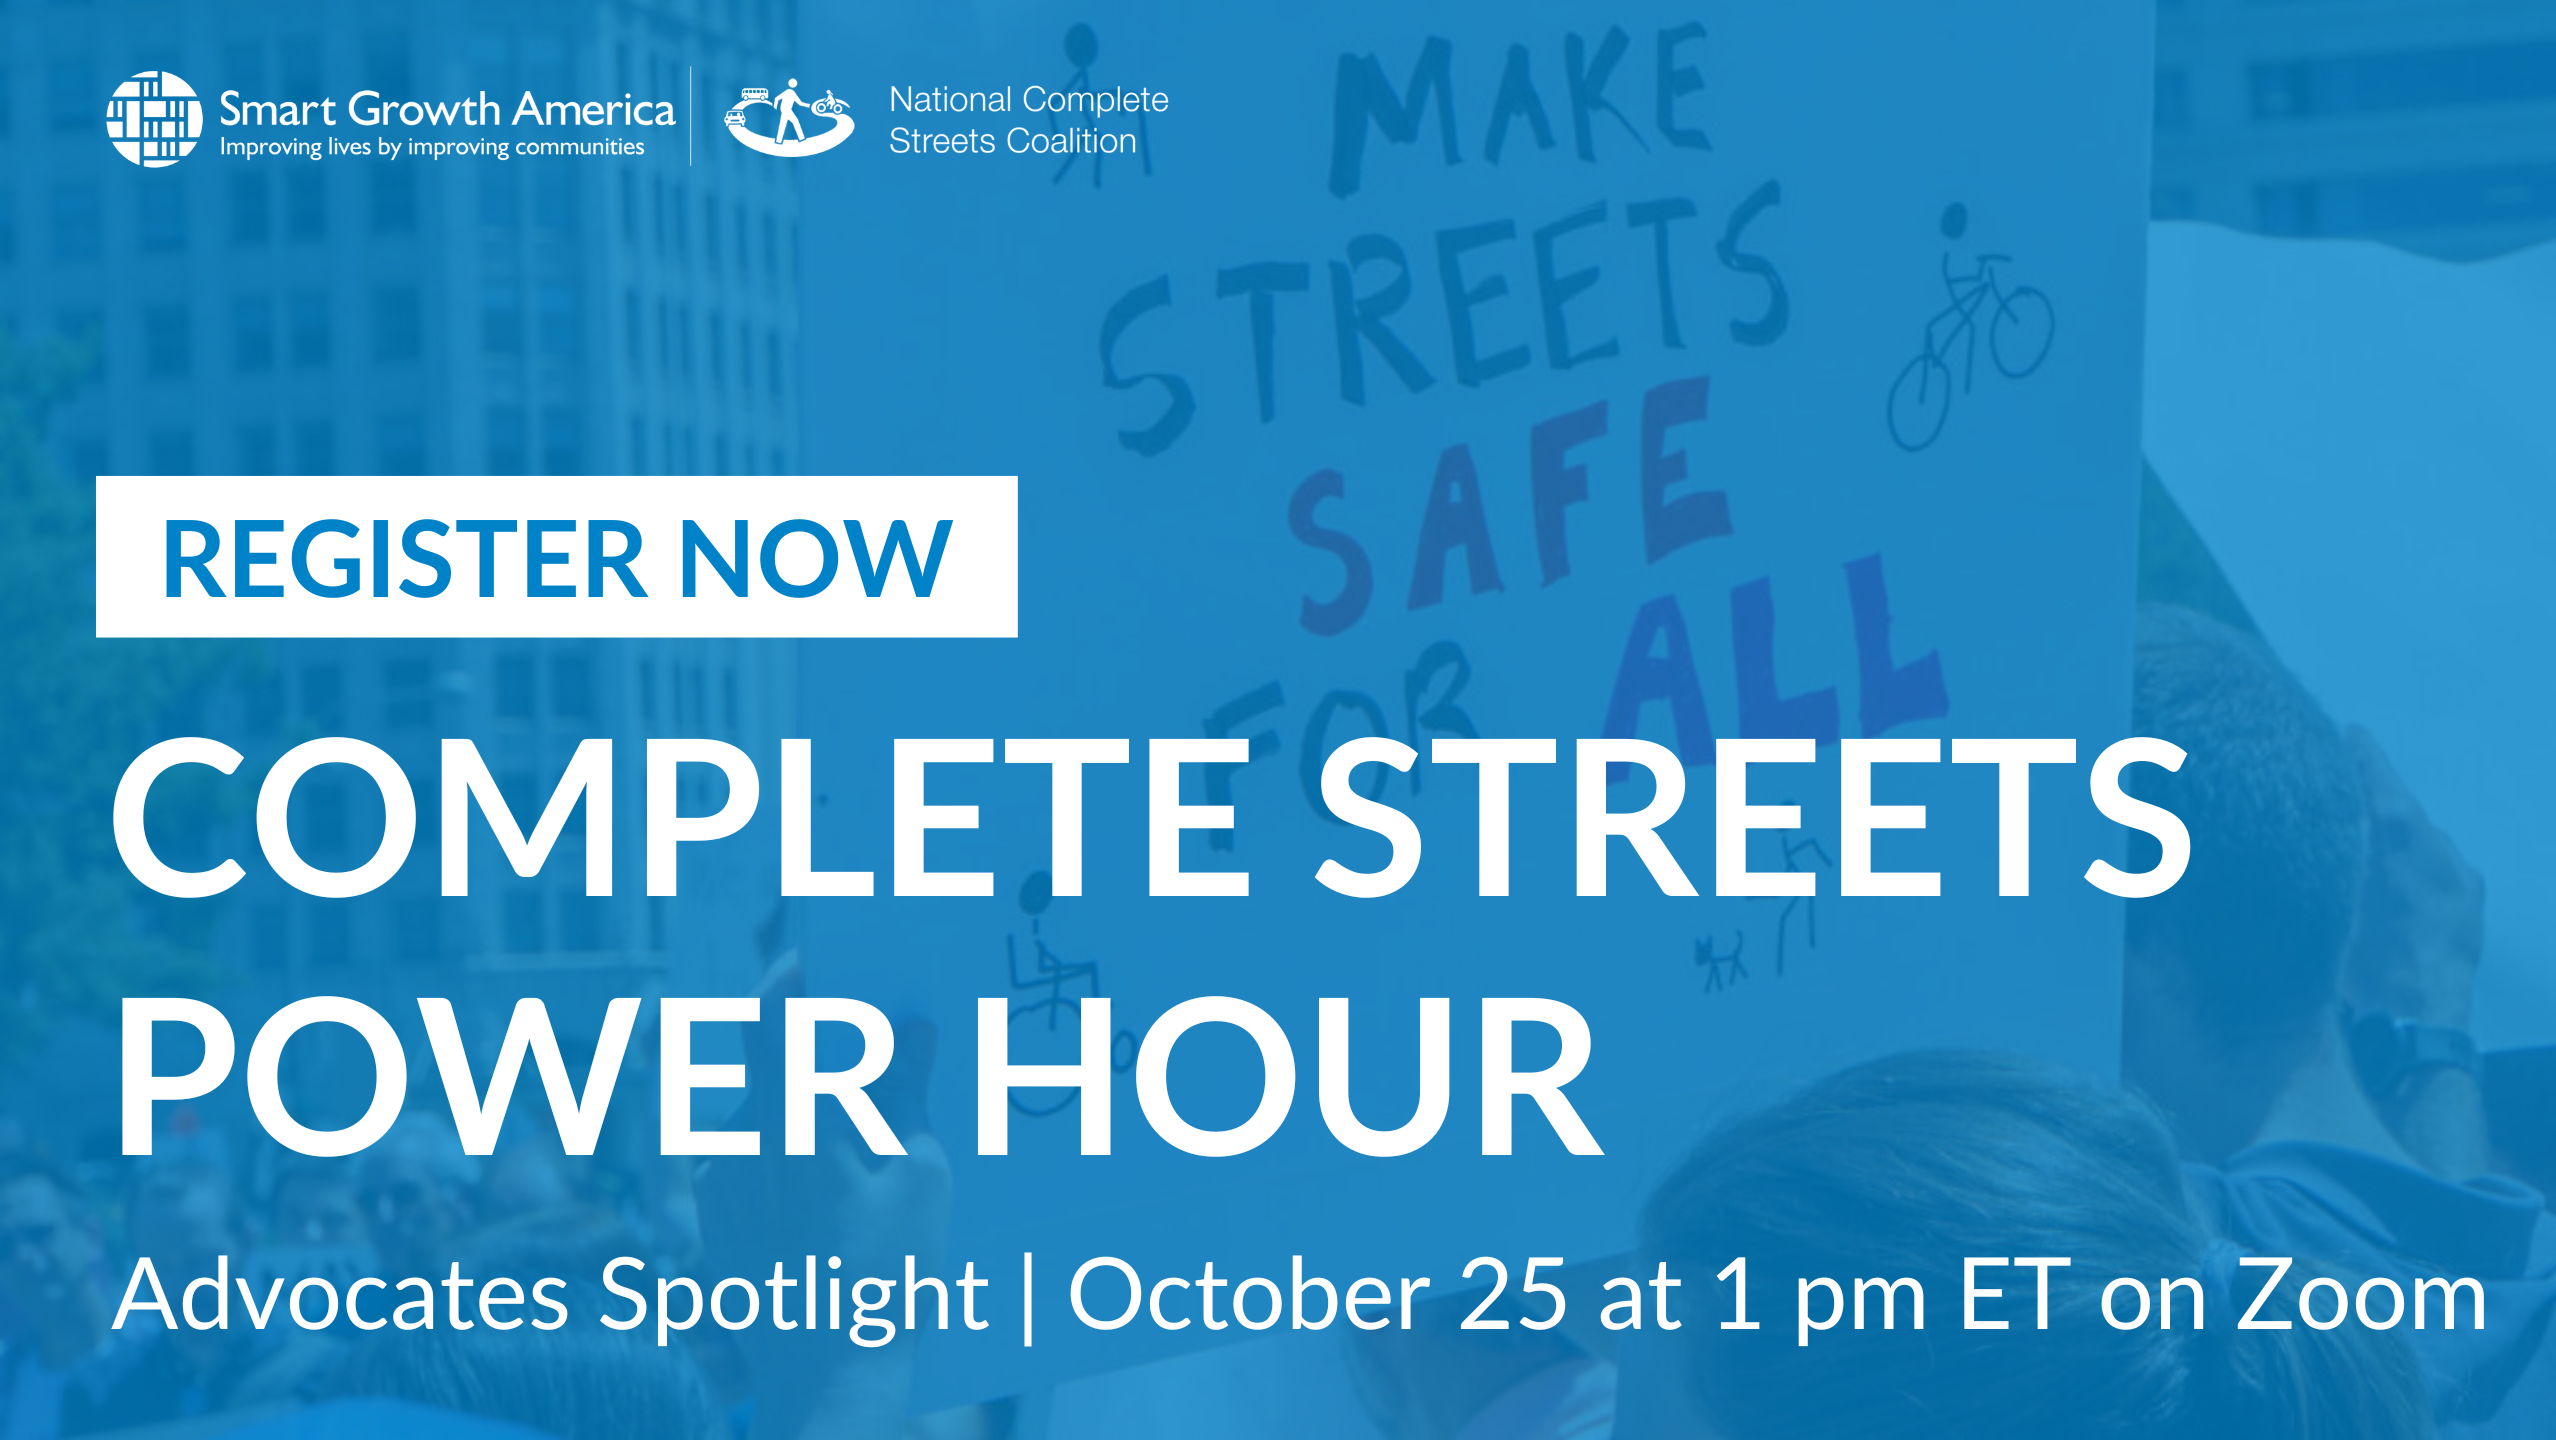 Register now for Complete Streets Power Hour: Advocates Spotlight on October 25 at 1 p.m. ET on Zoom. Behind, a crowd of people holds up signs demanding safe streets for all.